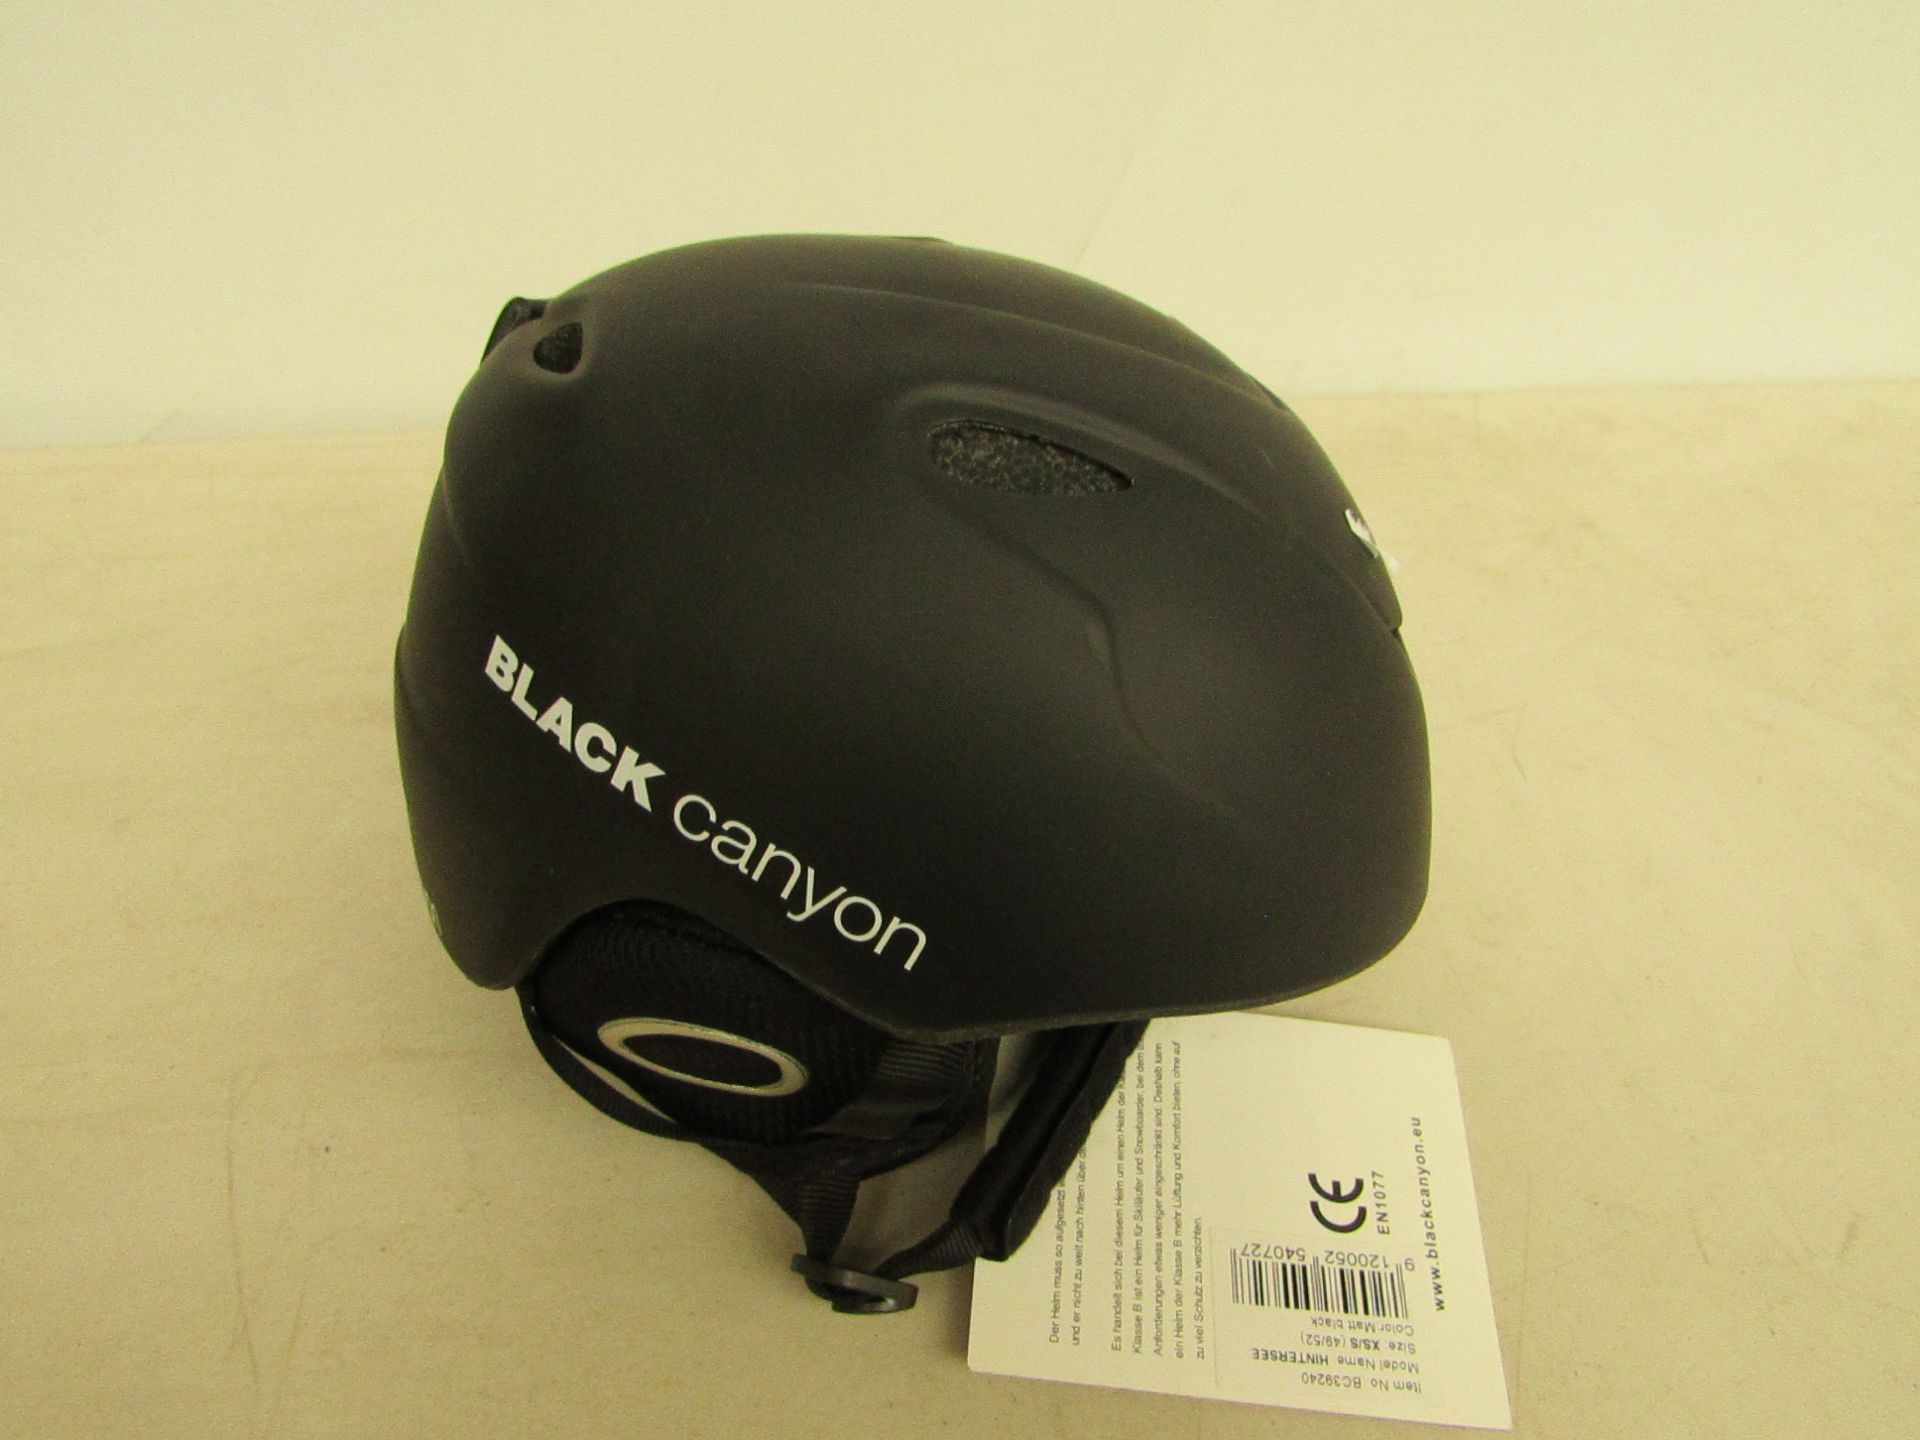 Black Canyon Hintersee childrens ski helmet size XS/S, new with tags.